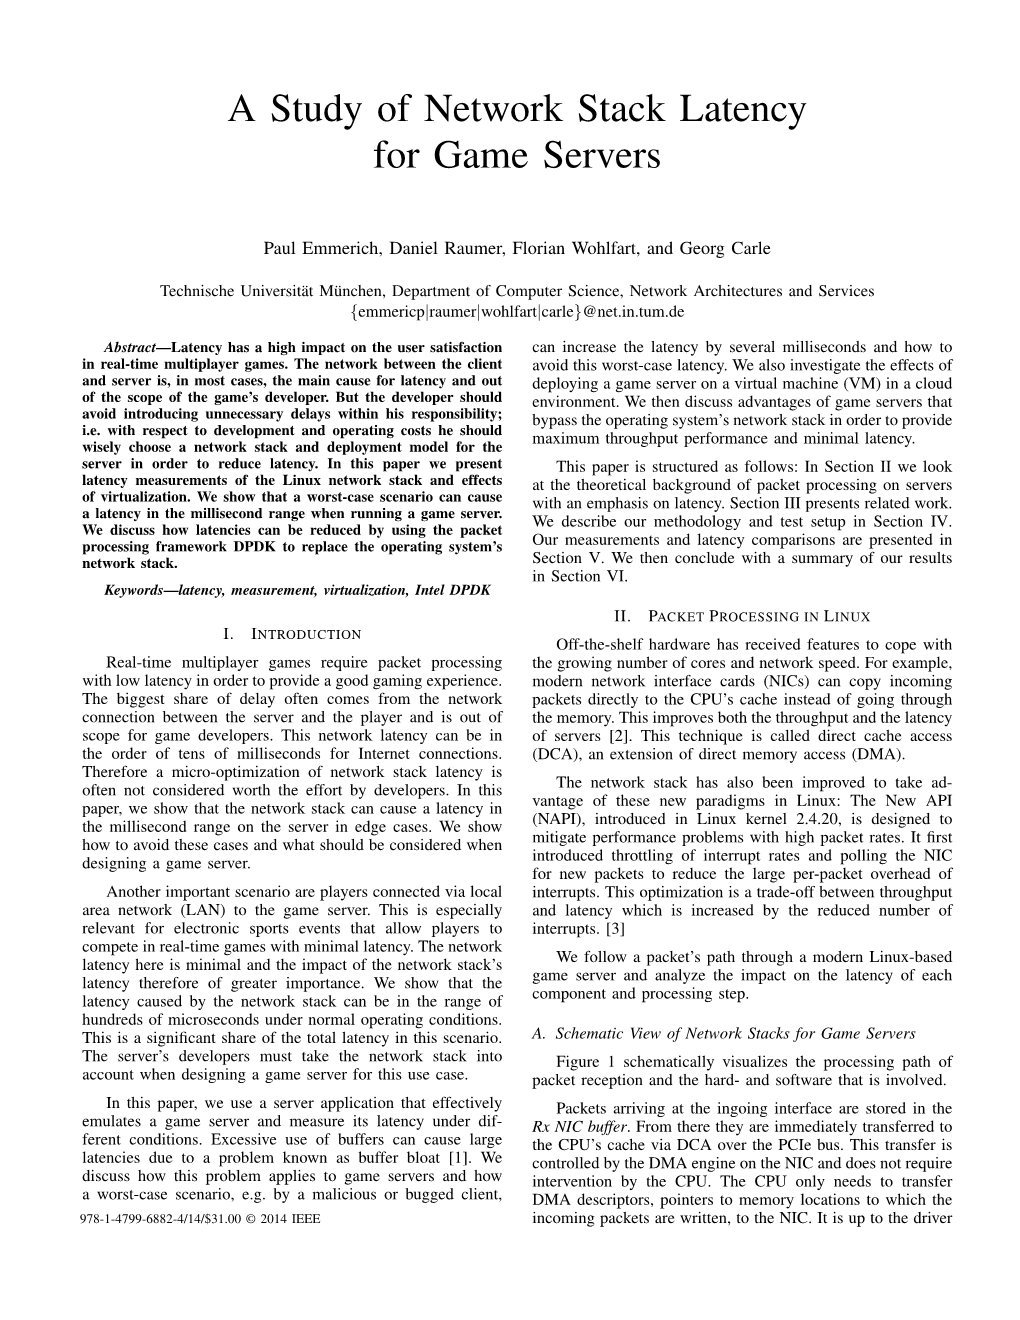 A Study of Network Stack Latency for Game Servers